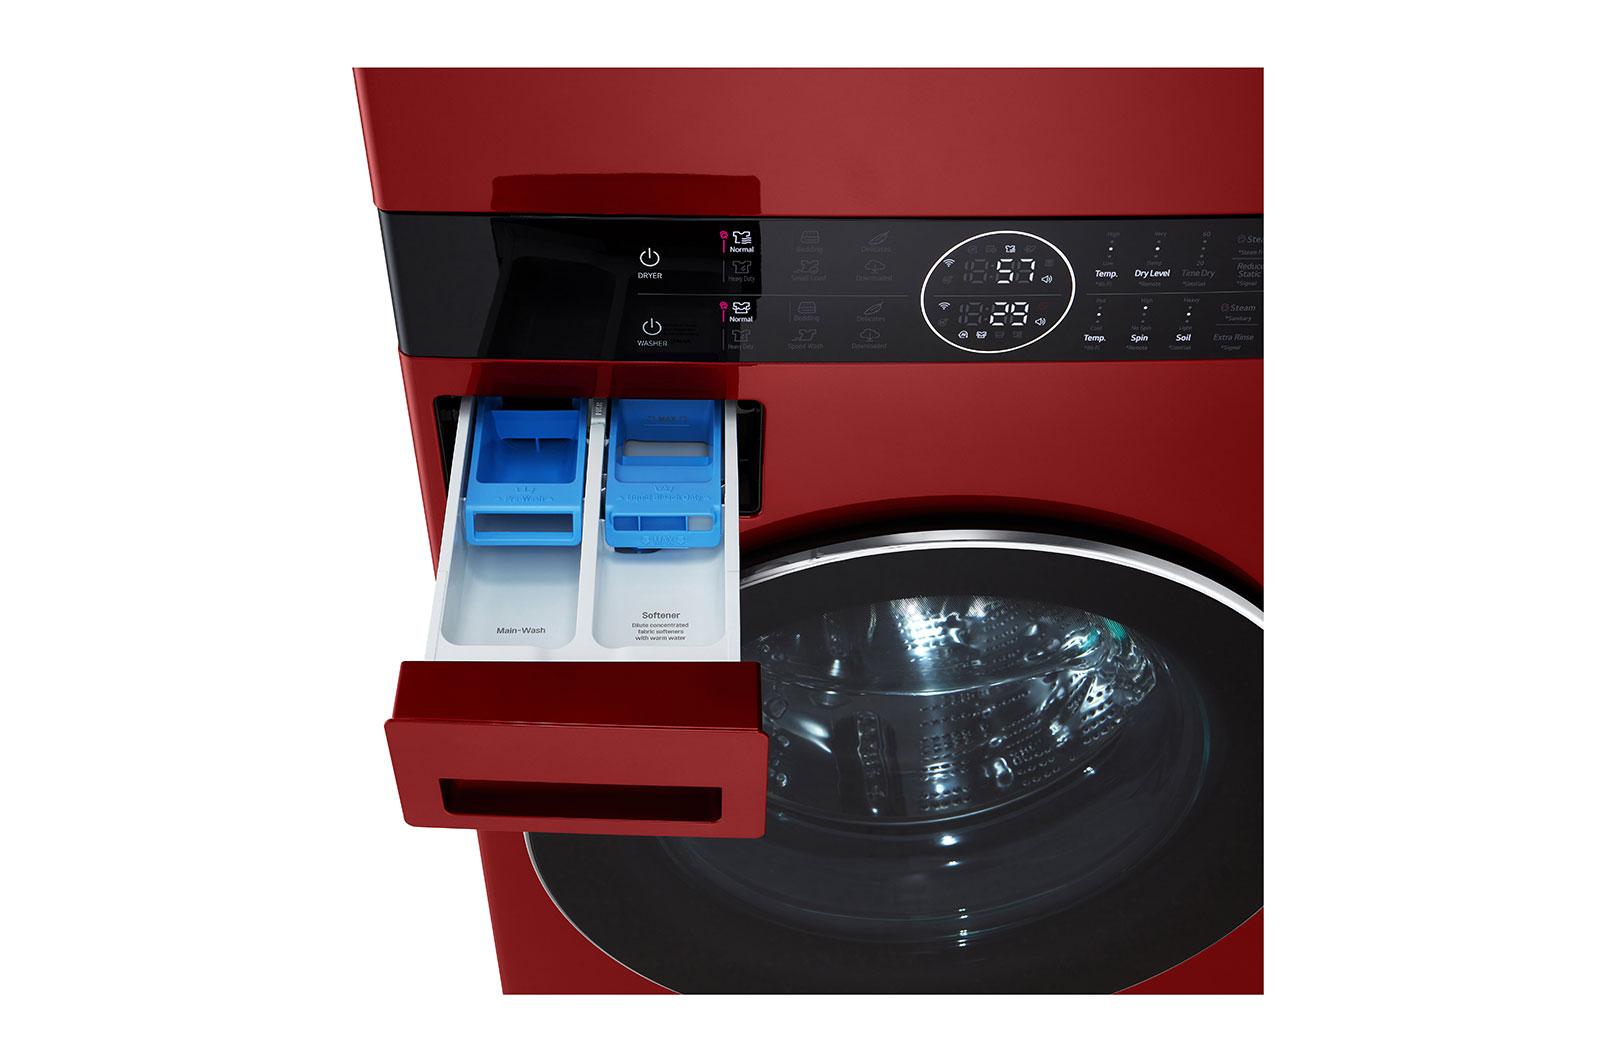 Lg Single Unit Front Load LG WashTower™ with Center Control™ 4.5 cu. ft. Washer and 7.4 cu. ft. Electric Dryer.